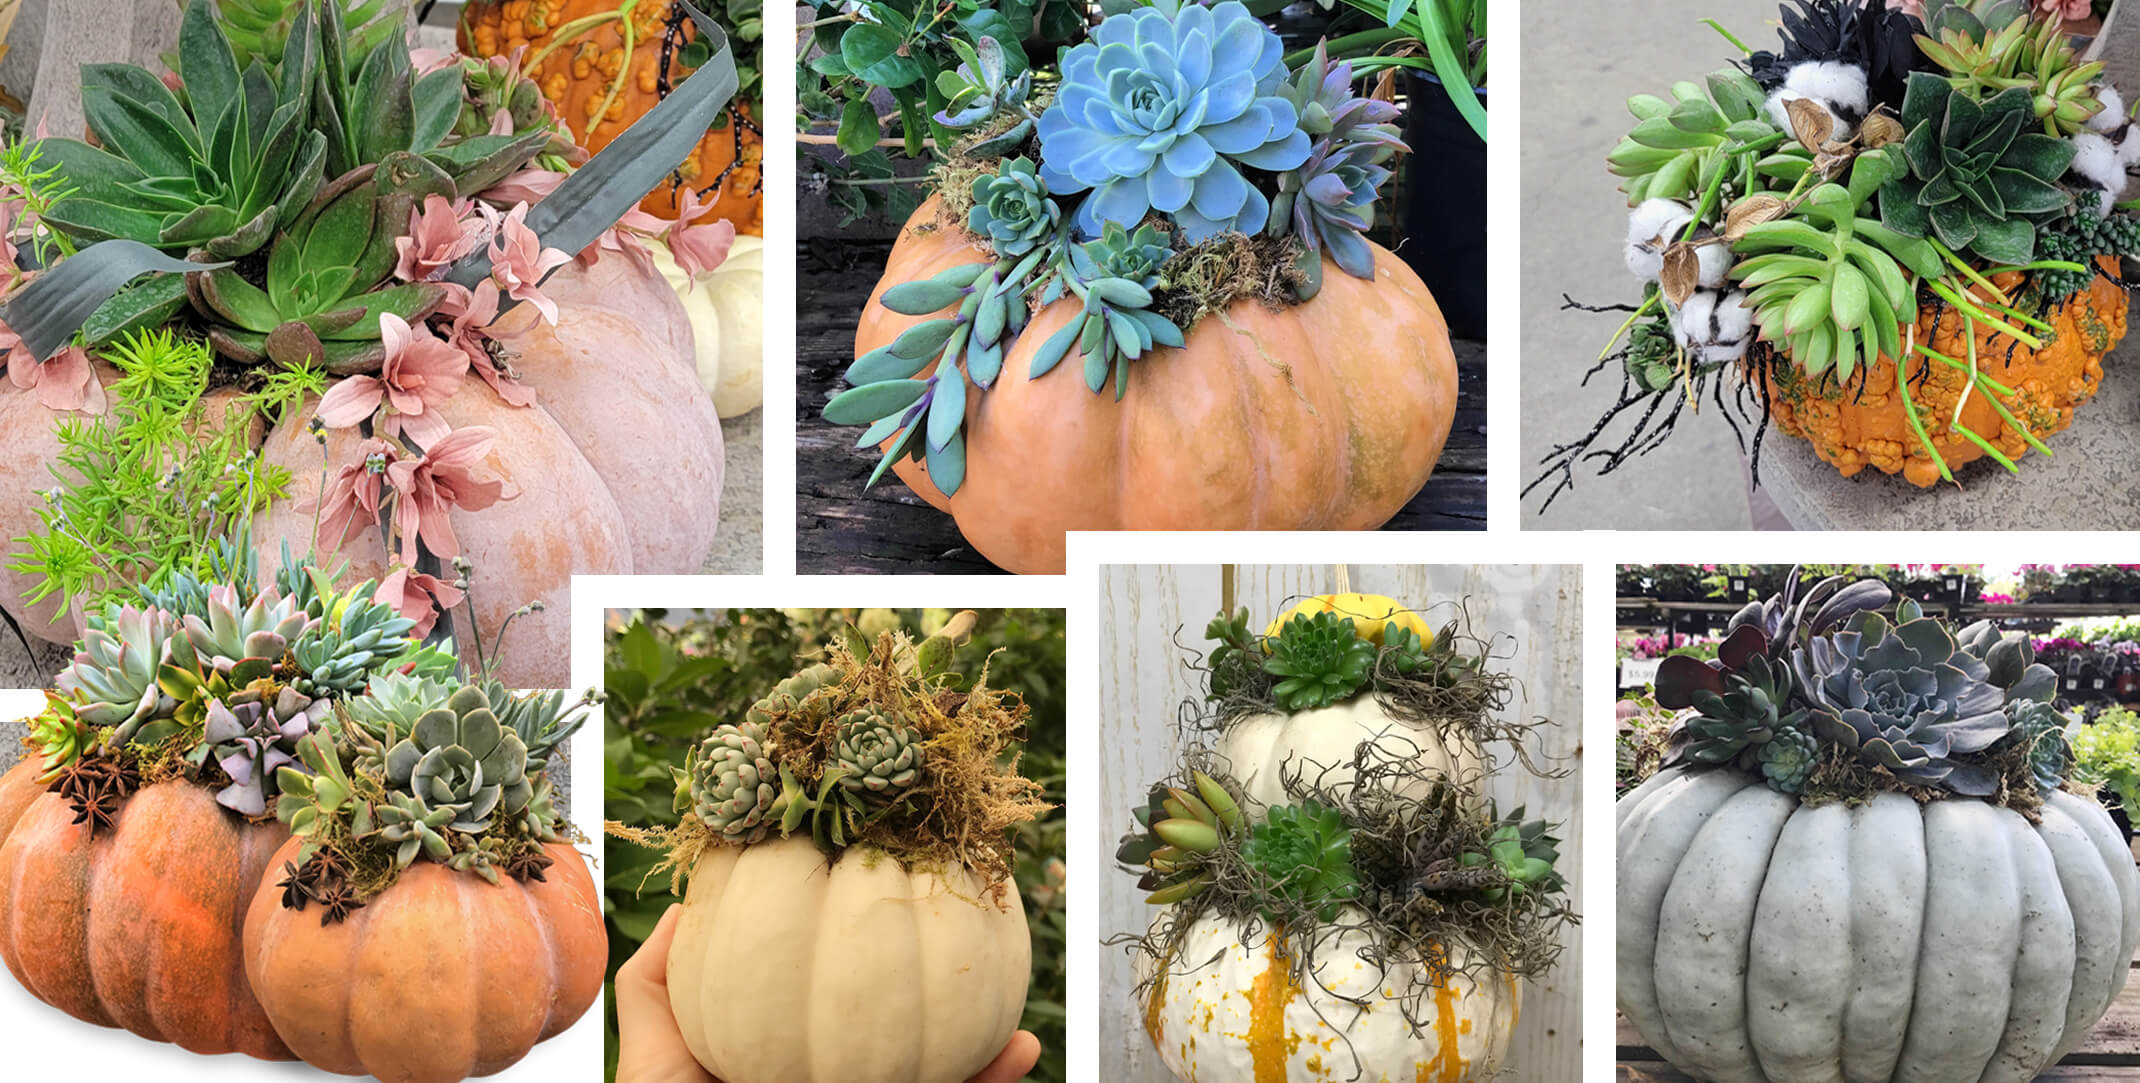 multiple pictures of pumpkins with succulents, moss, sticks, leaves and other decorative elements adorning various pumpkins for a decorative appeal